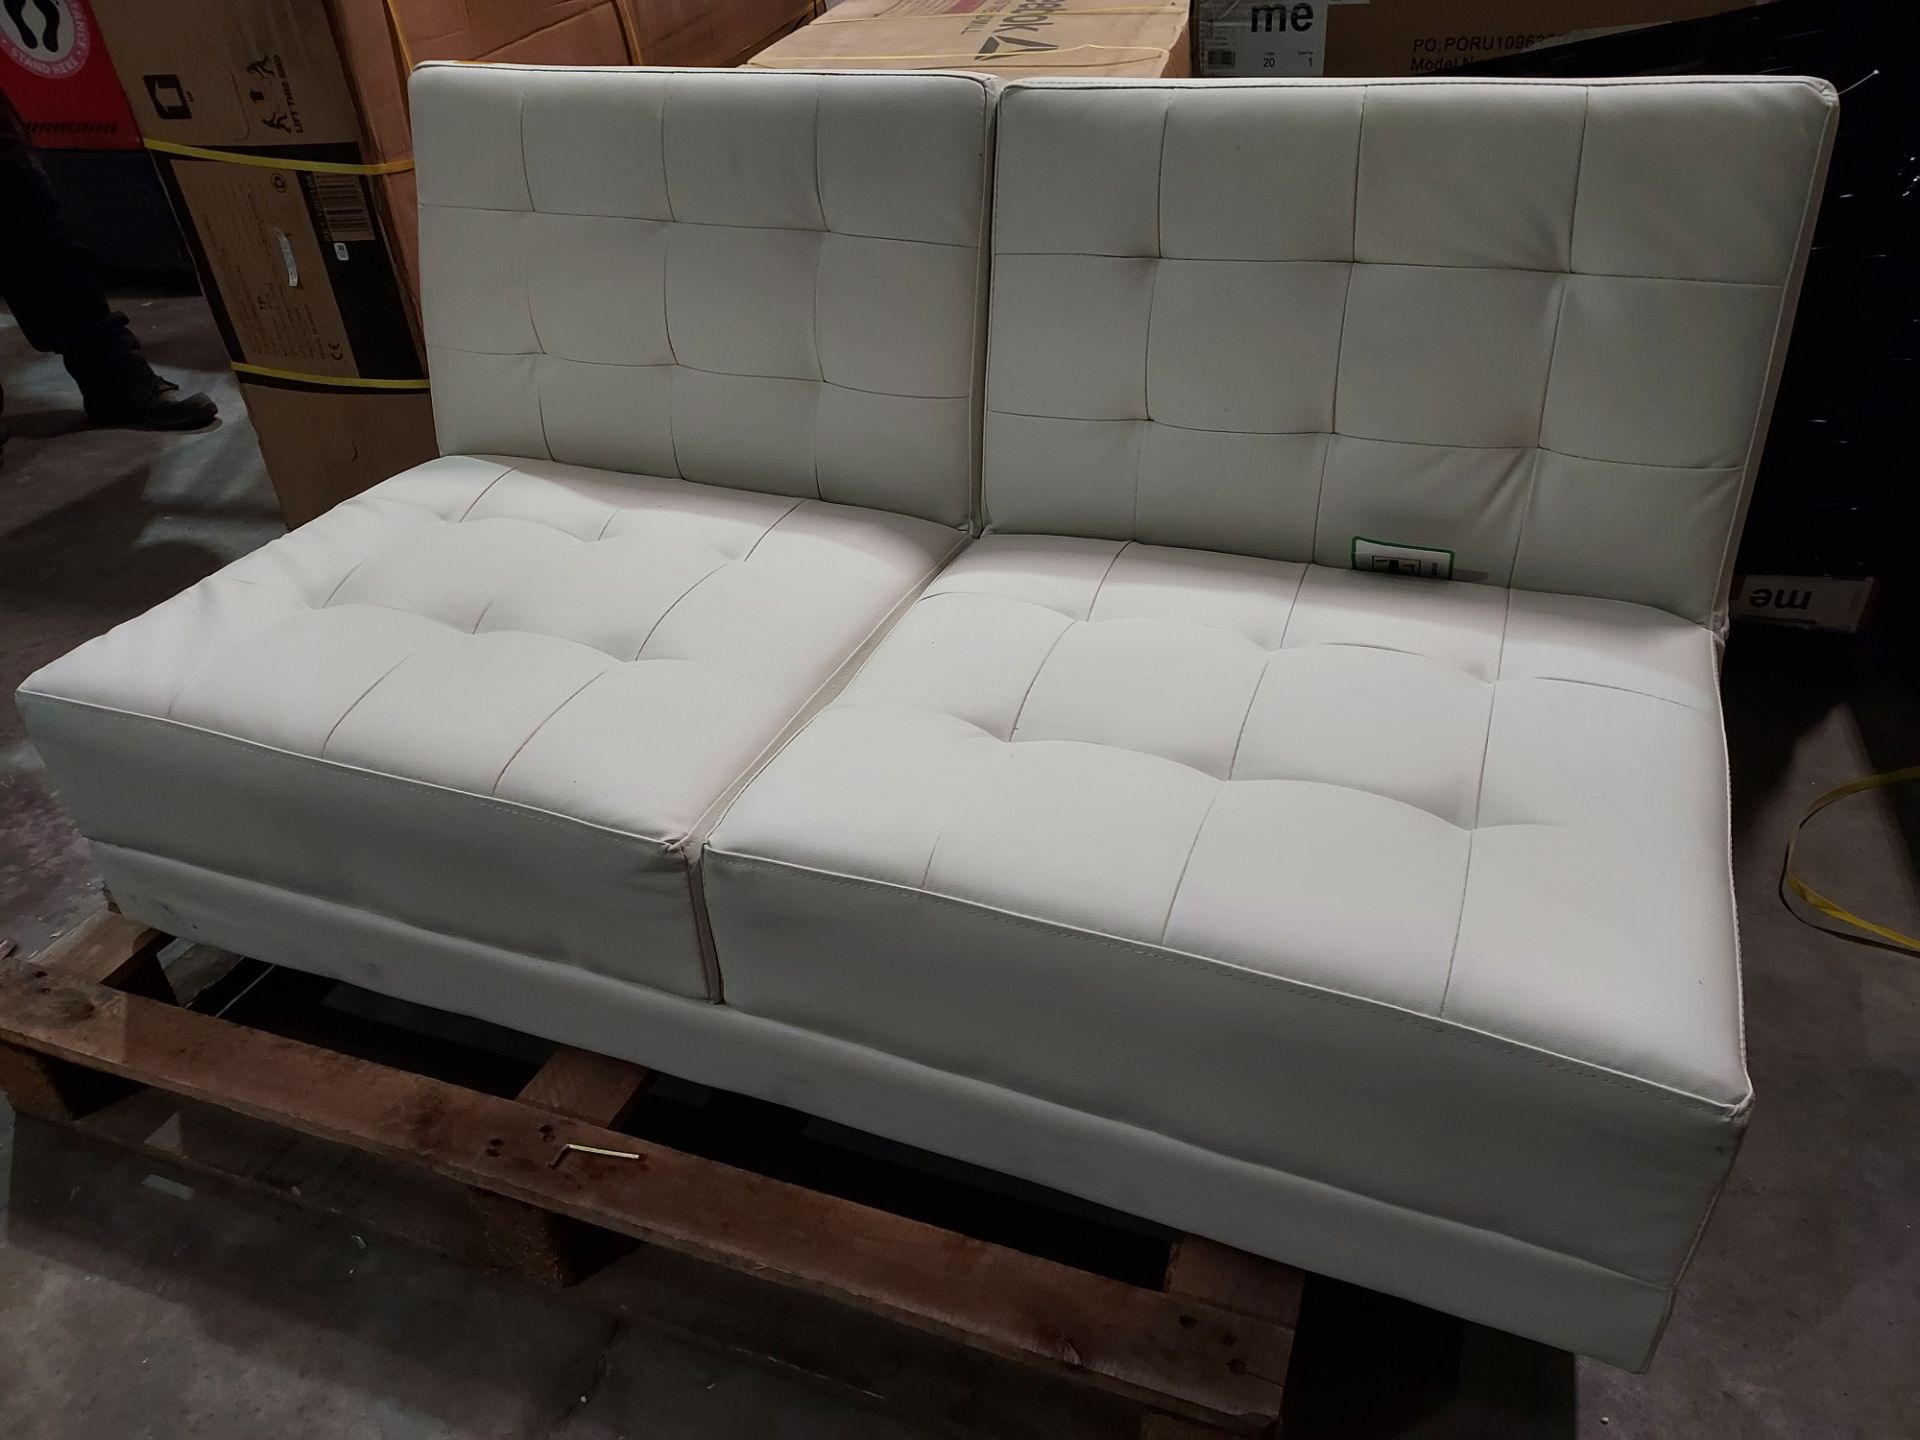 2 X 2 SEATER RECLINER IN CRÈME - MISSING LEGS AND ARM RESTS- IDEAL FOR ANY DIY PROJECT/